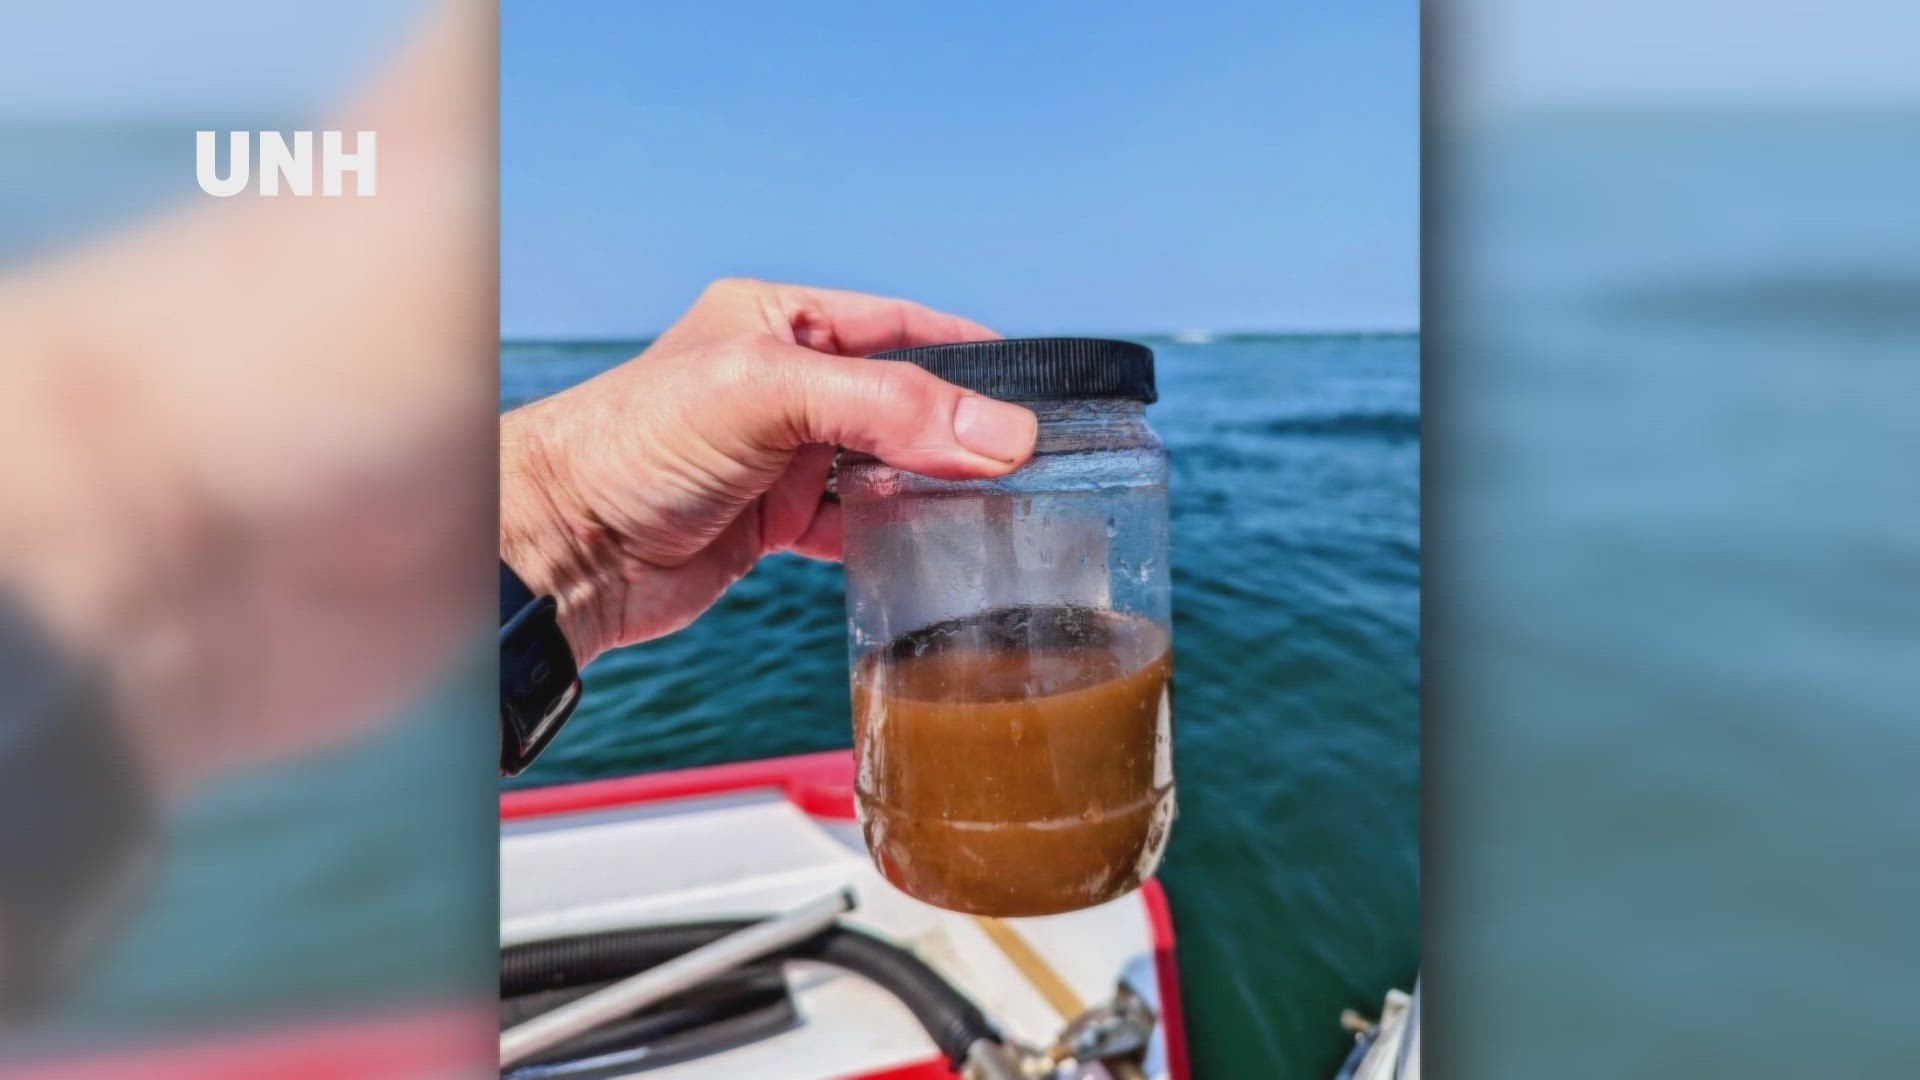 The bloom extends from Penobscot Bay to Martha's Vineyard and scientists warn of potential environmental harm once the algae dies.